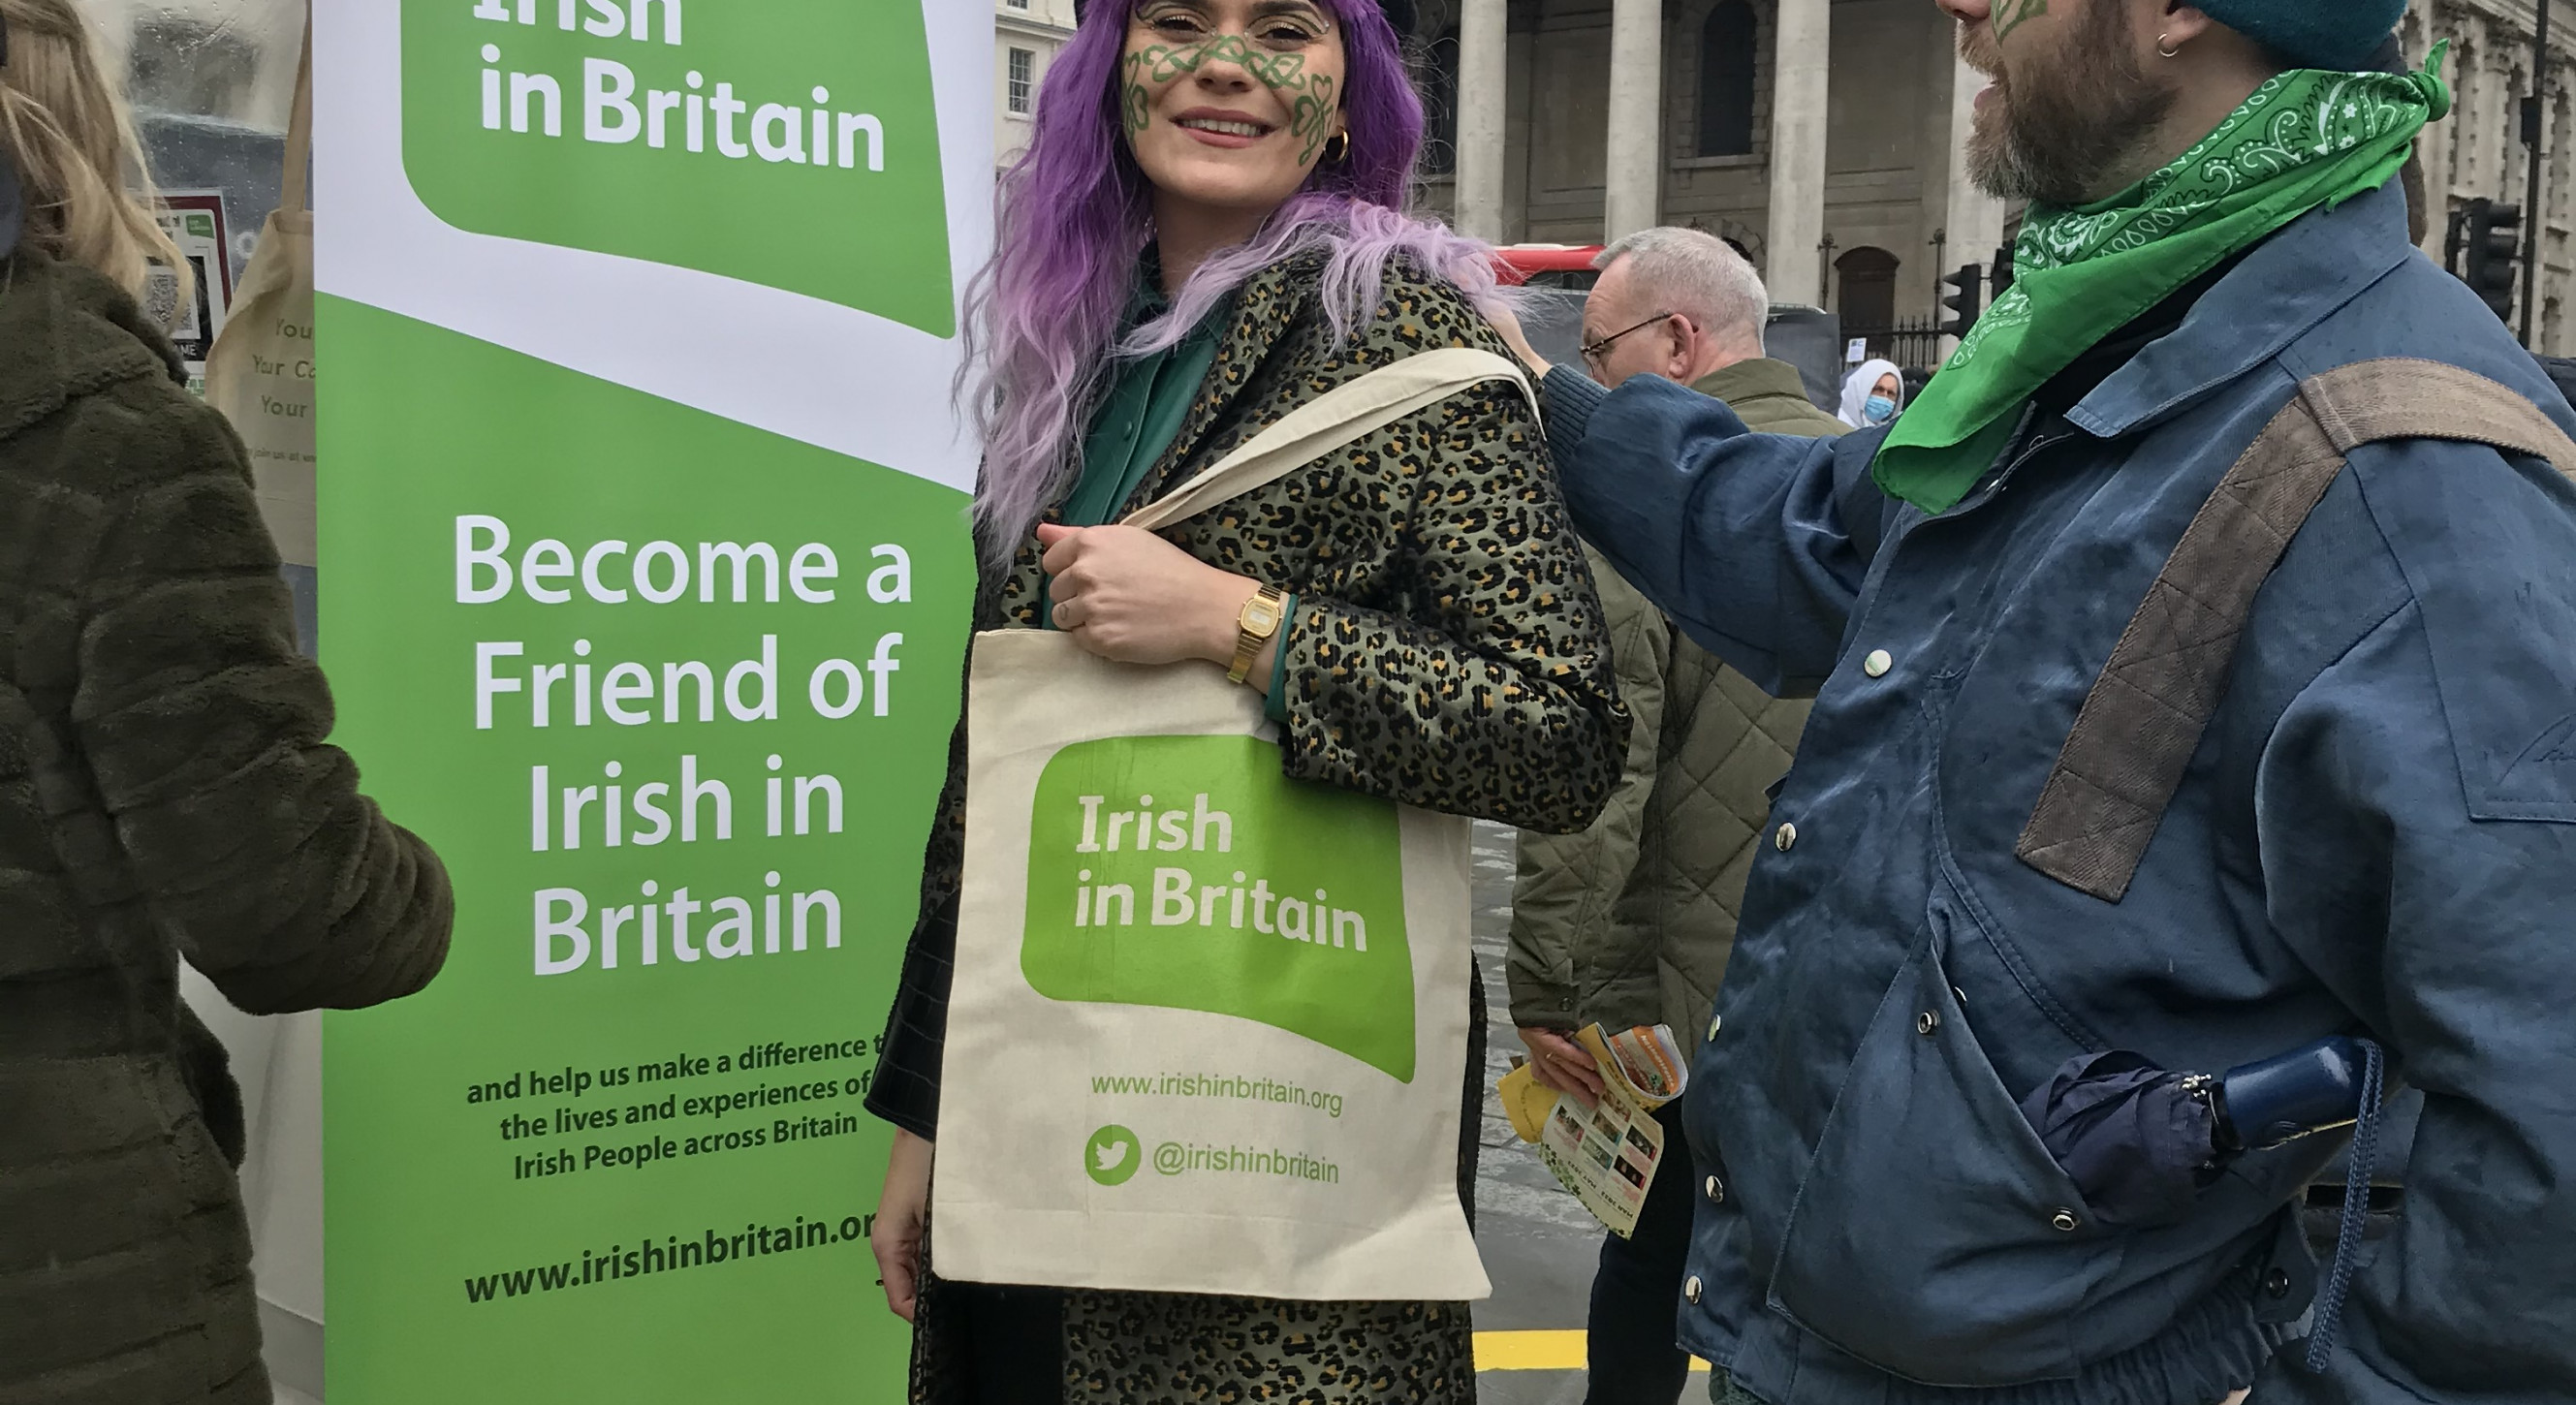 The proud new owner of an Irish in Britain tote bag.